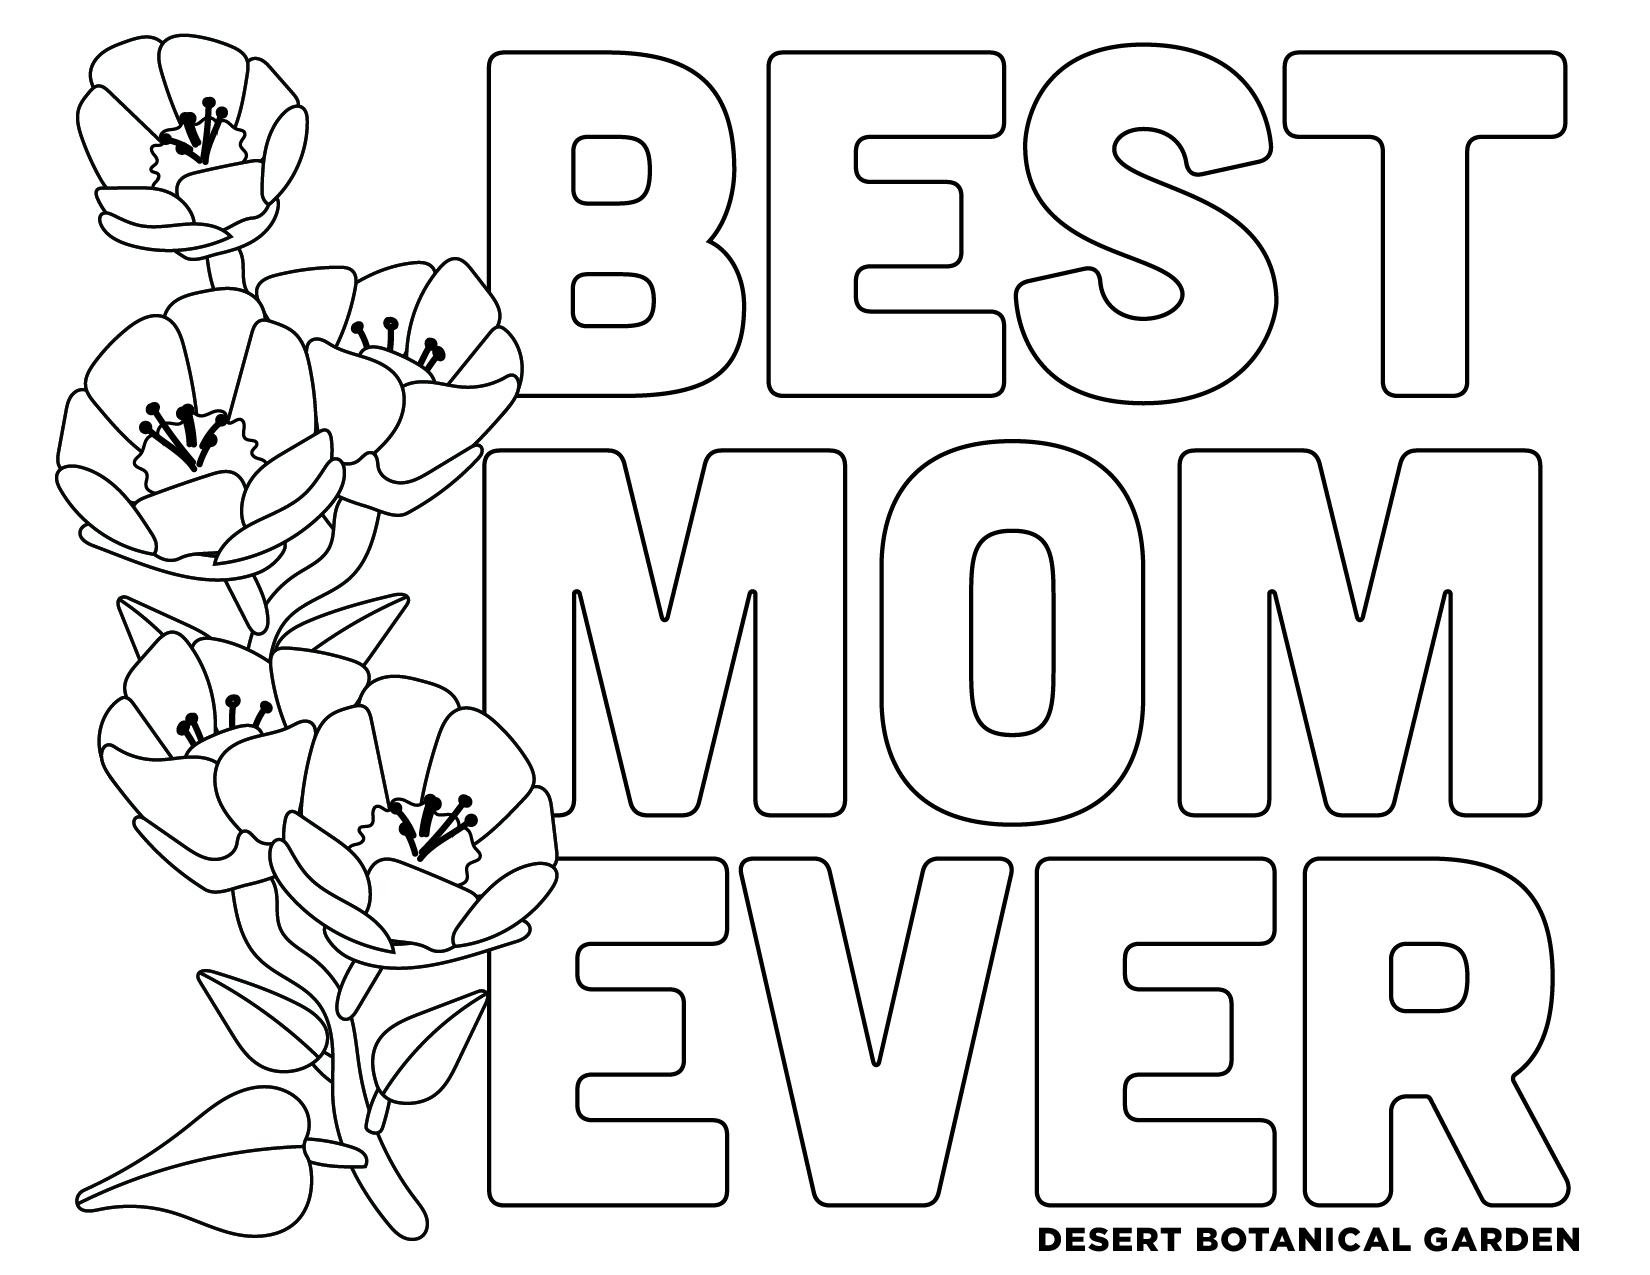 Mothers day card with boy drawing Royalty Free Vector Image-saigonsouth.com.vn